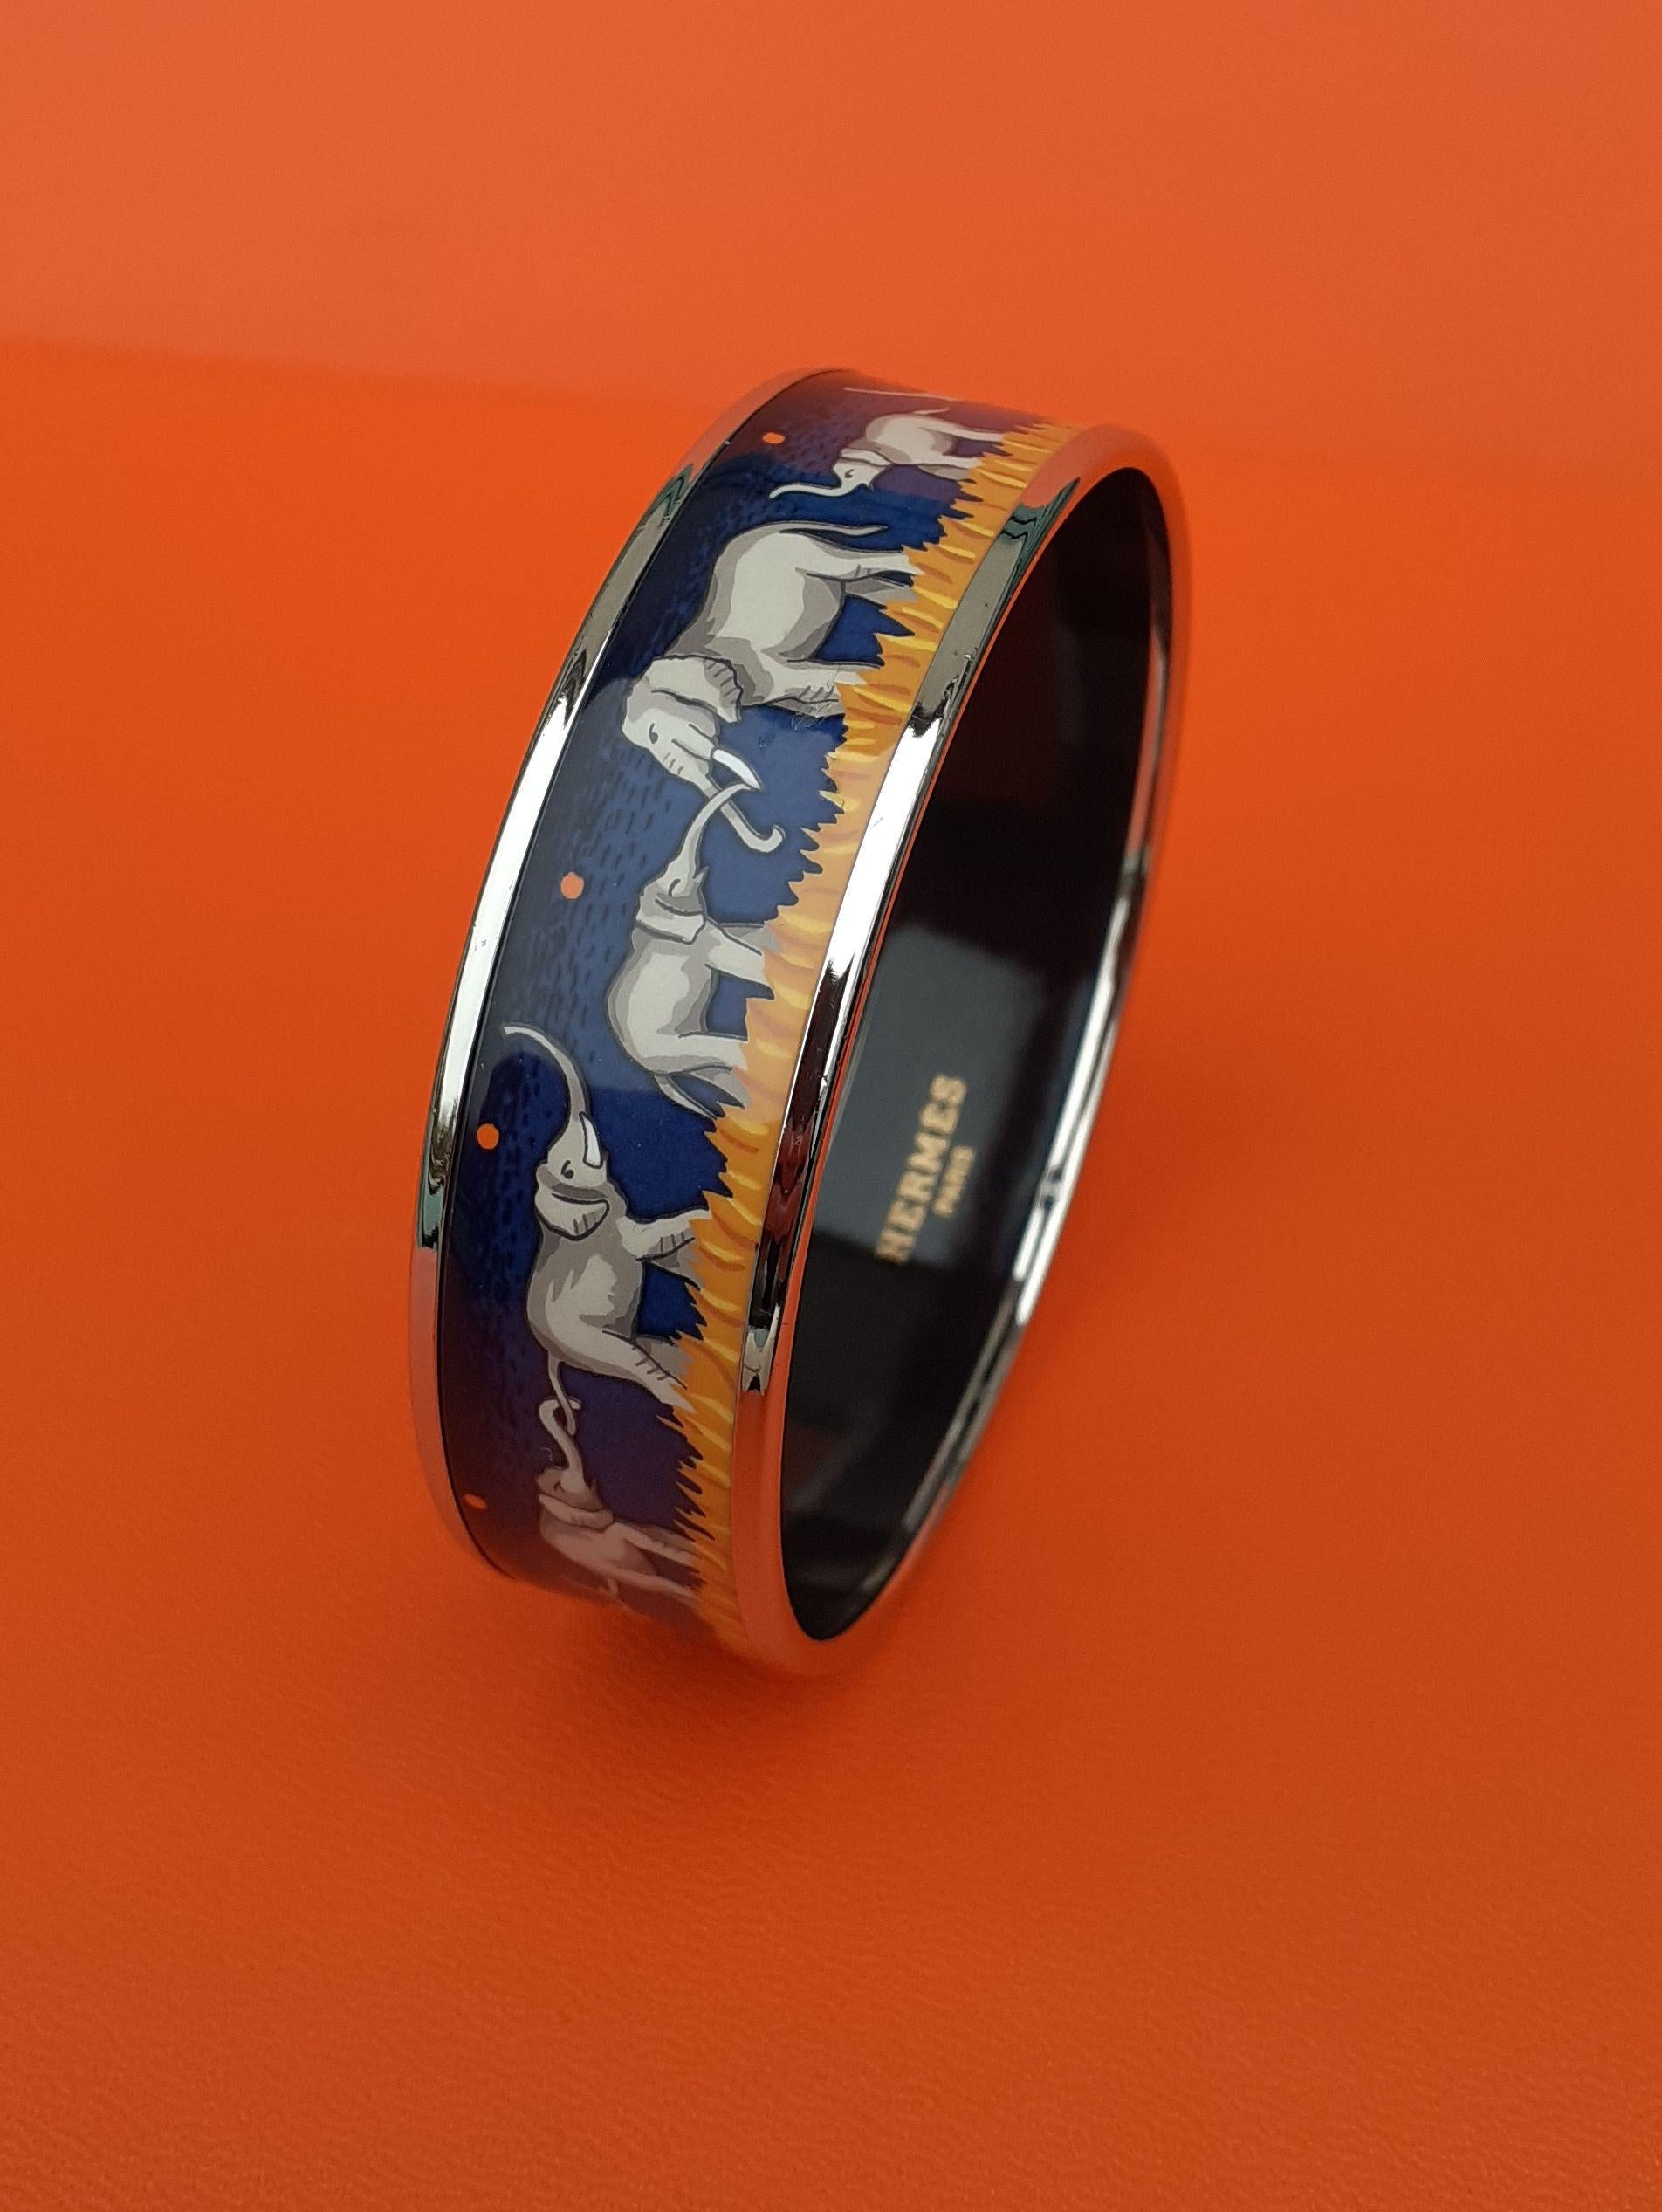 Beautiful Authentic Hermès Bracelet

Pattern: Elephants Grazing

Rare colorway ! Hard to find

Made in Austria + I
 
Made of Printed Enamel and Palladium Plated Hardware (Silver-tone)

Colorways: Blue background with orange polka dots, Grey